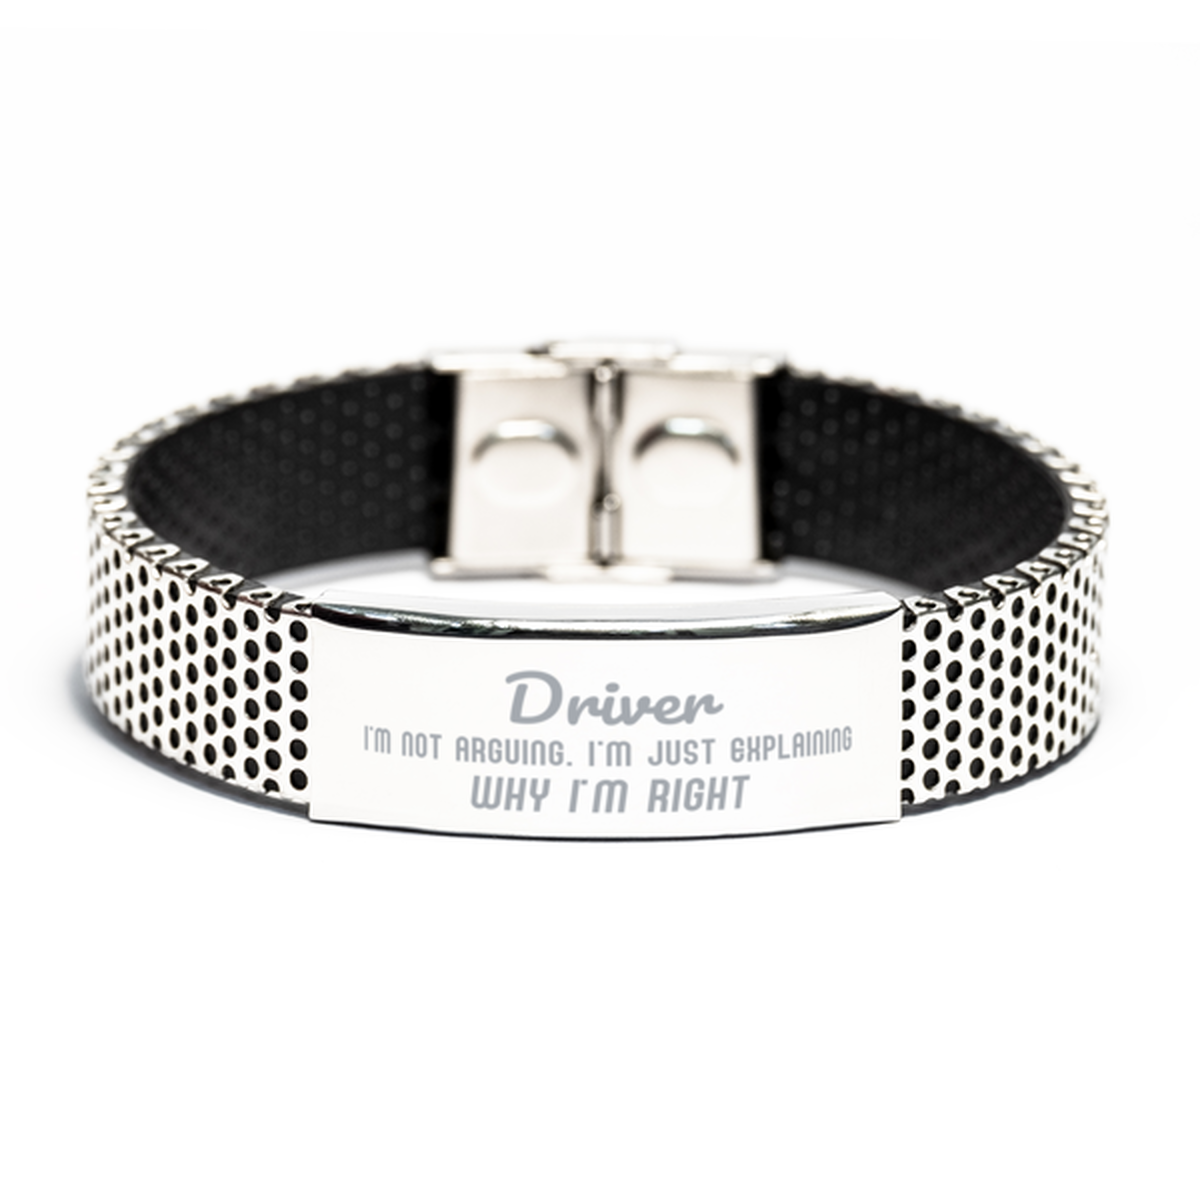 Driver I'm not Arguing. I'm Just Explaining Why I'm RIGHT Stainless Steel Bracelet, Funny Saying Quote Driver Gifts For Driver Graduation Birthday Christmas Gifts for Men Women Coworker